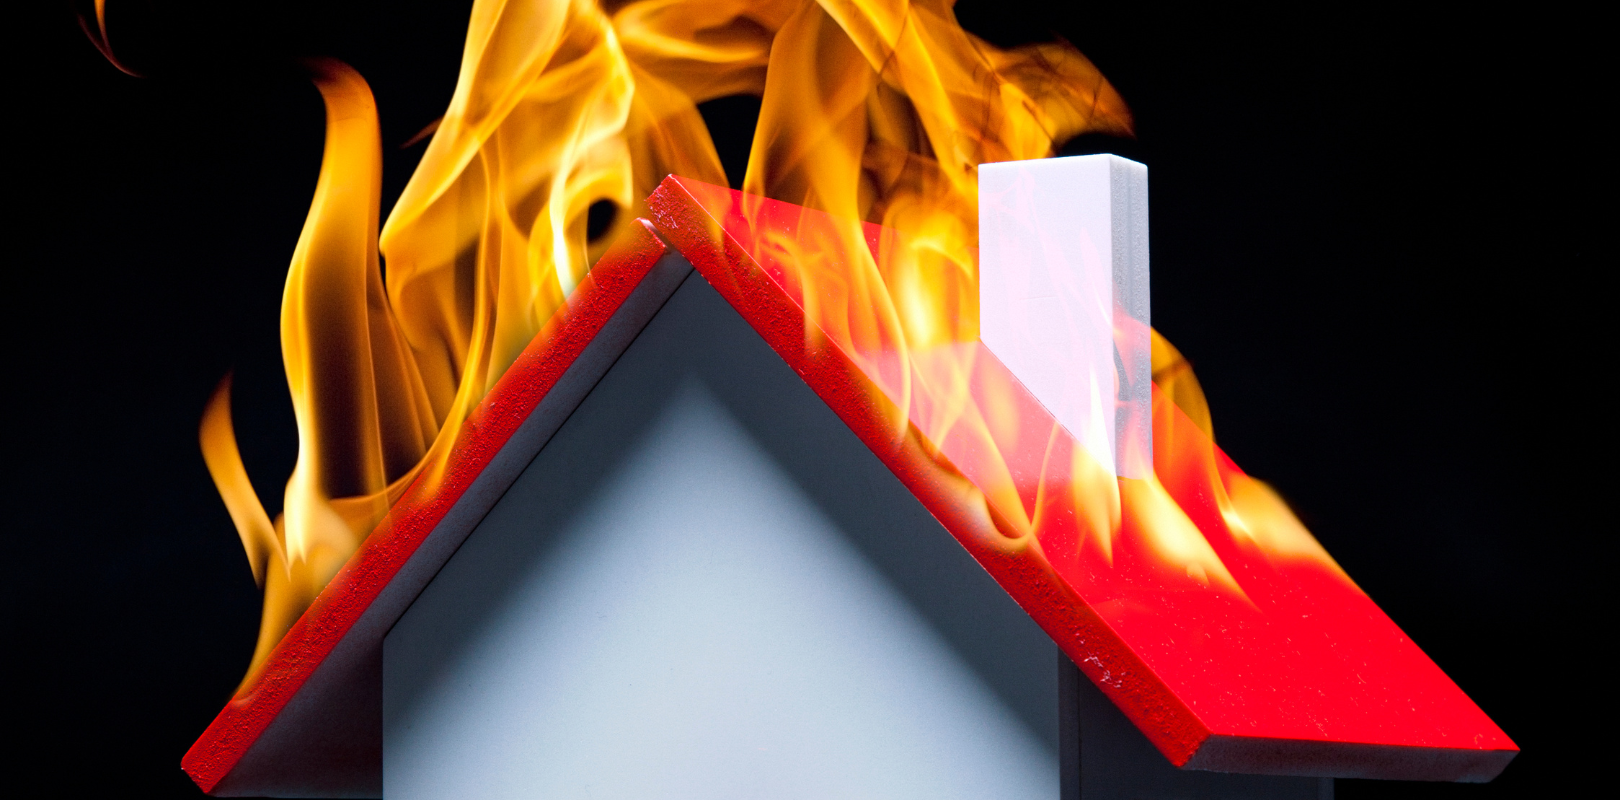 How To Sell Fire Damage House Fast in Texas